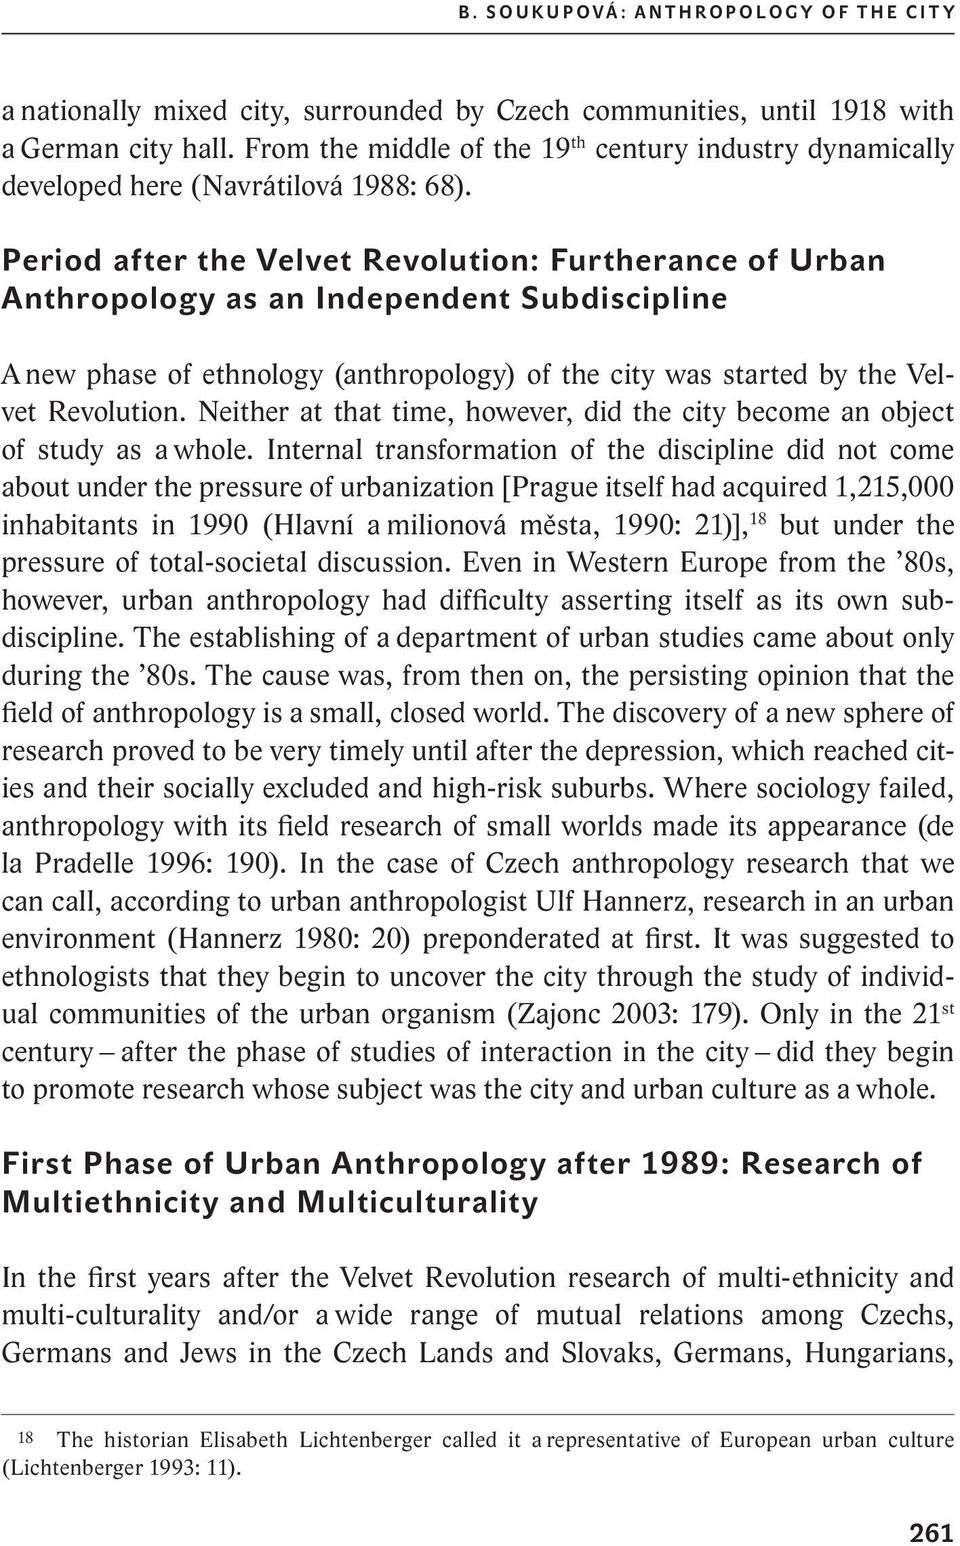 Period after the velvet revolution: furtherance of urban anthropology as an independent subdiscipline A new phase of ethnology (anthropology) of the city was started by the Velvet Revolution.